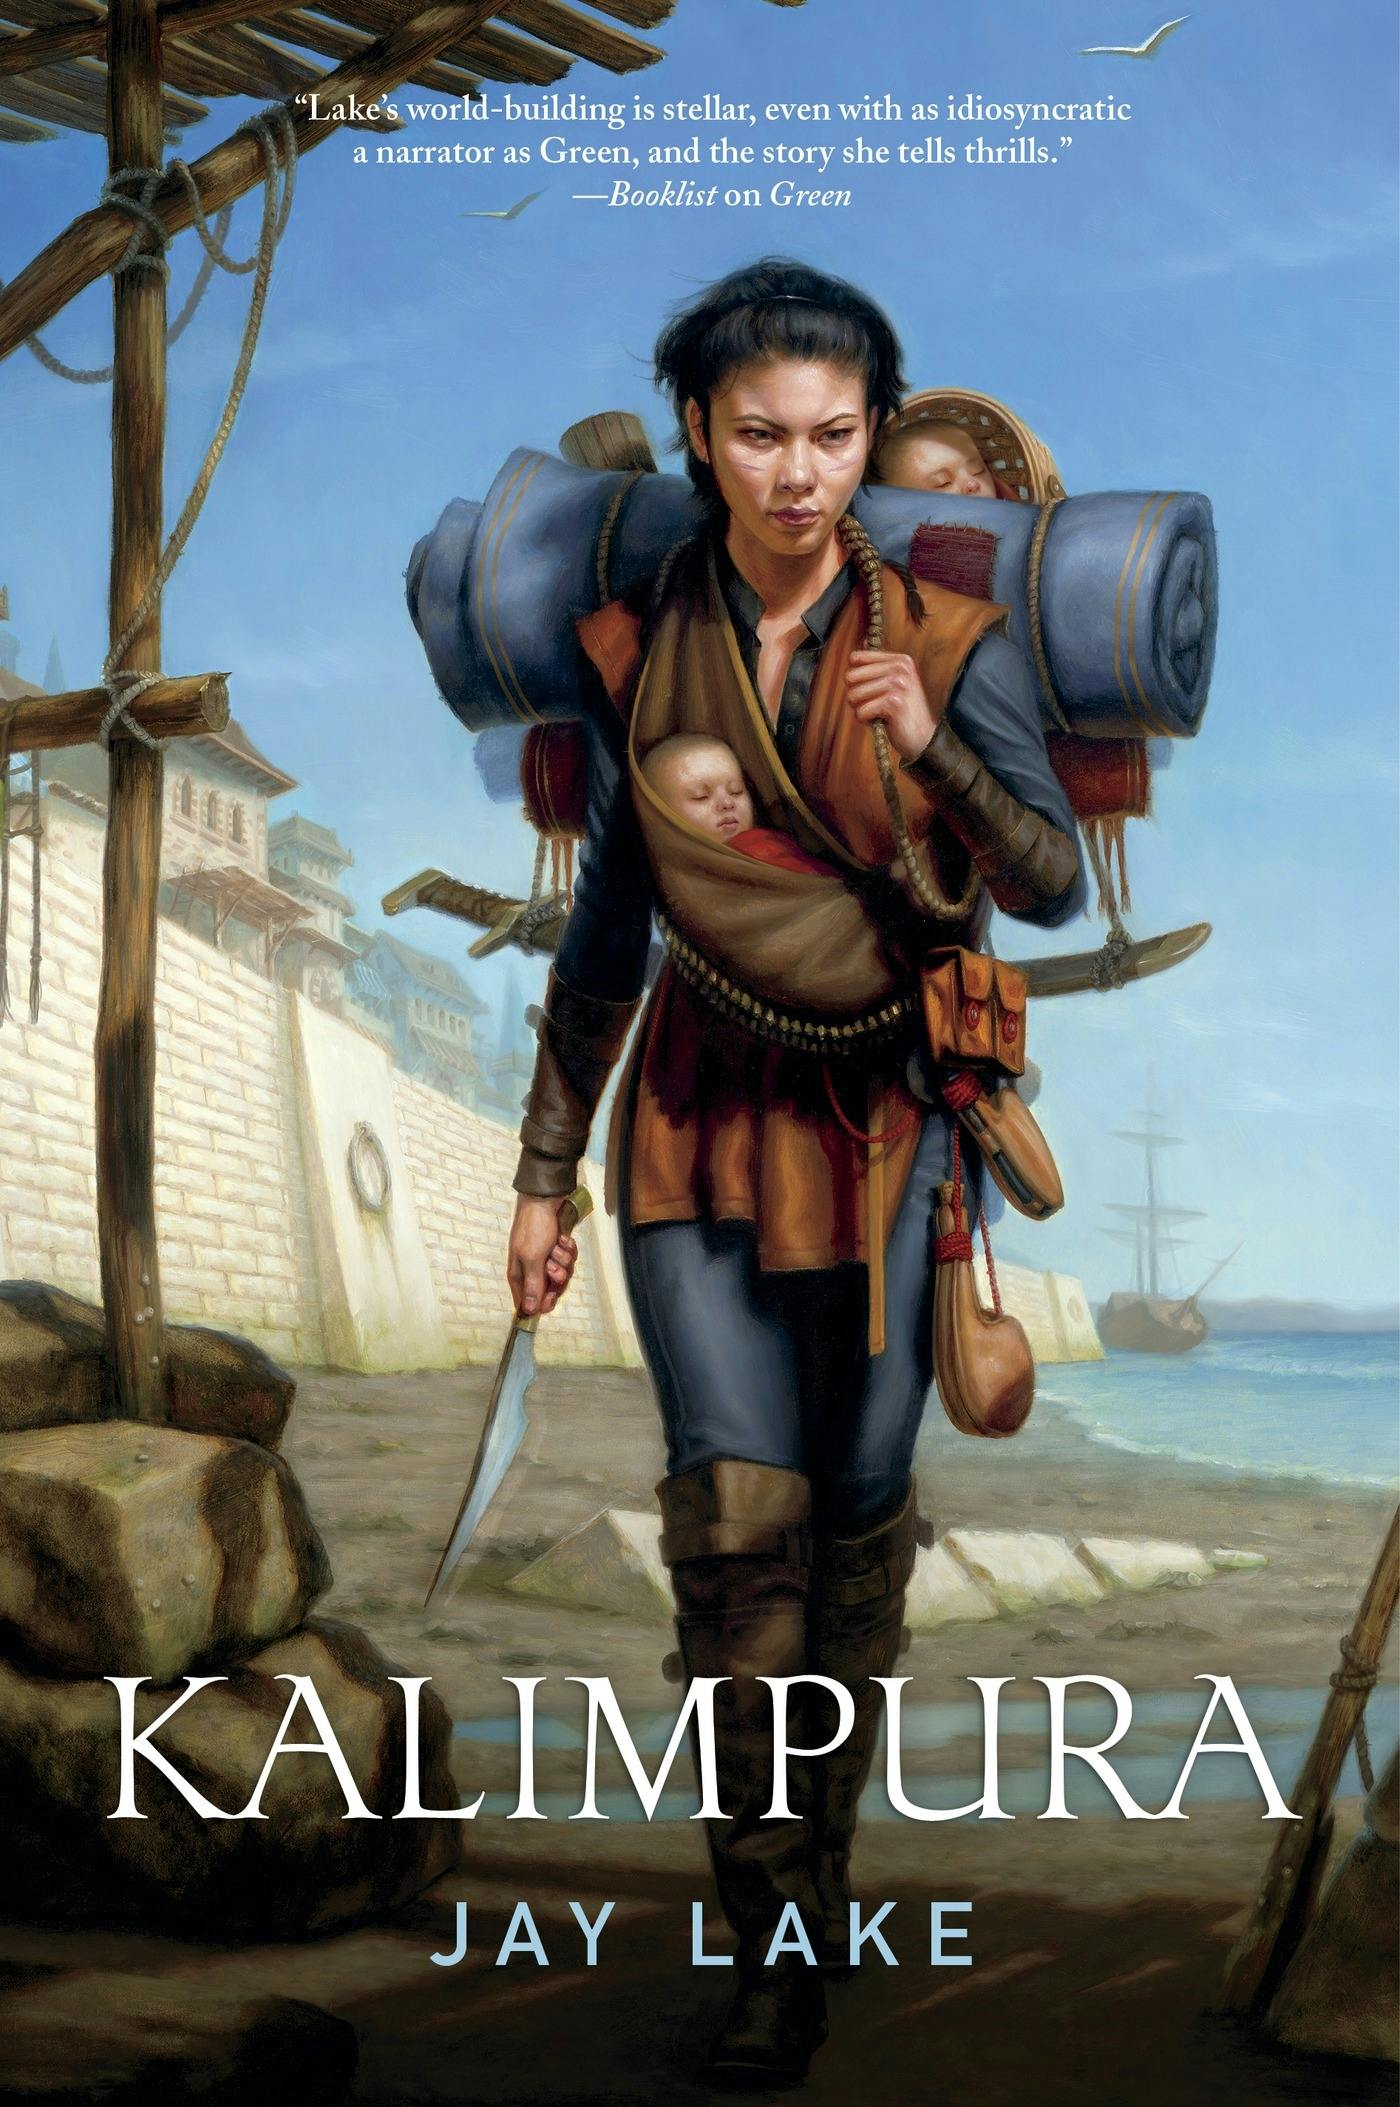 Cover for the book titled as: Kalimpura